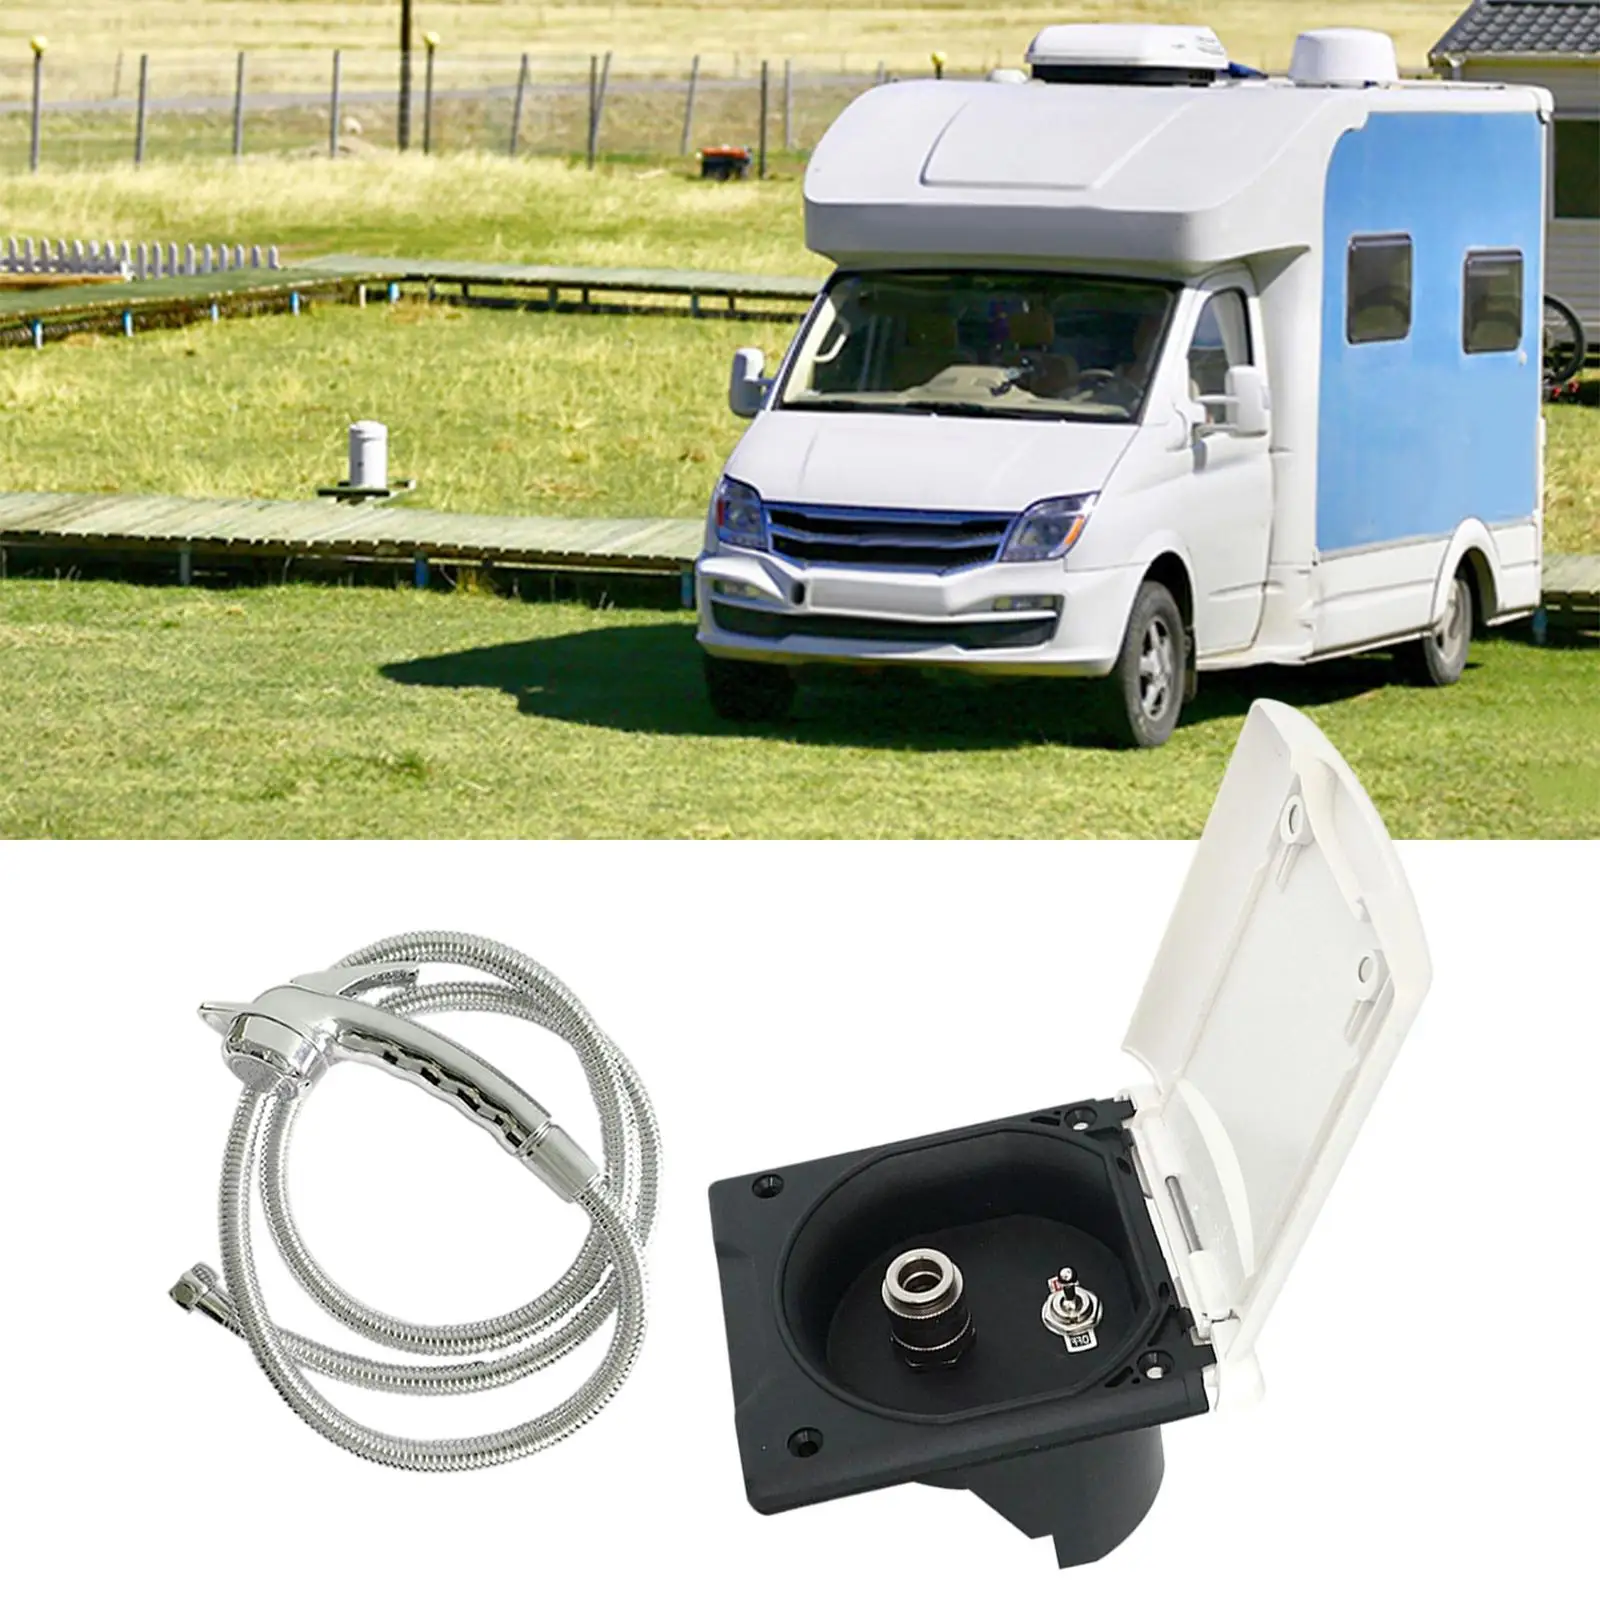 RV Exterior Shower Box Kit with Faucet Hose Weatherproof Outdoor Shower Box for Boat Shower Accessories Exterior Faucet